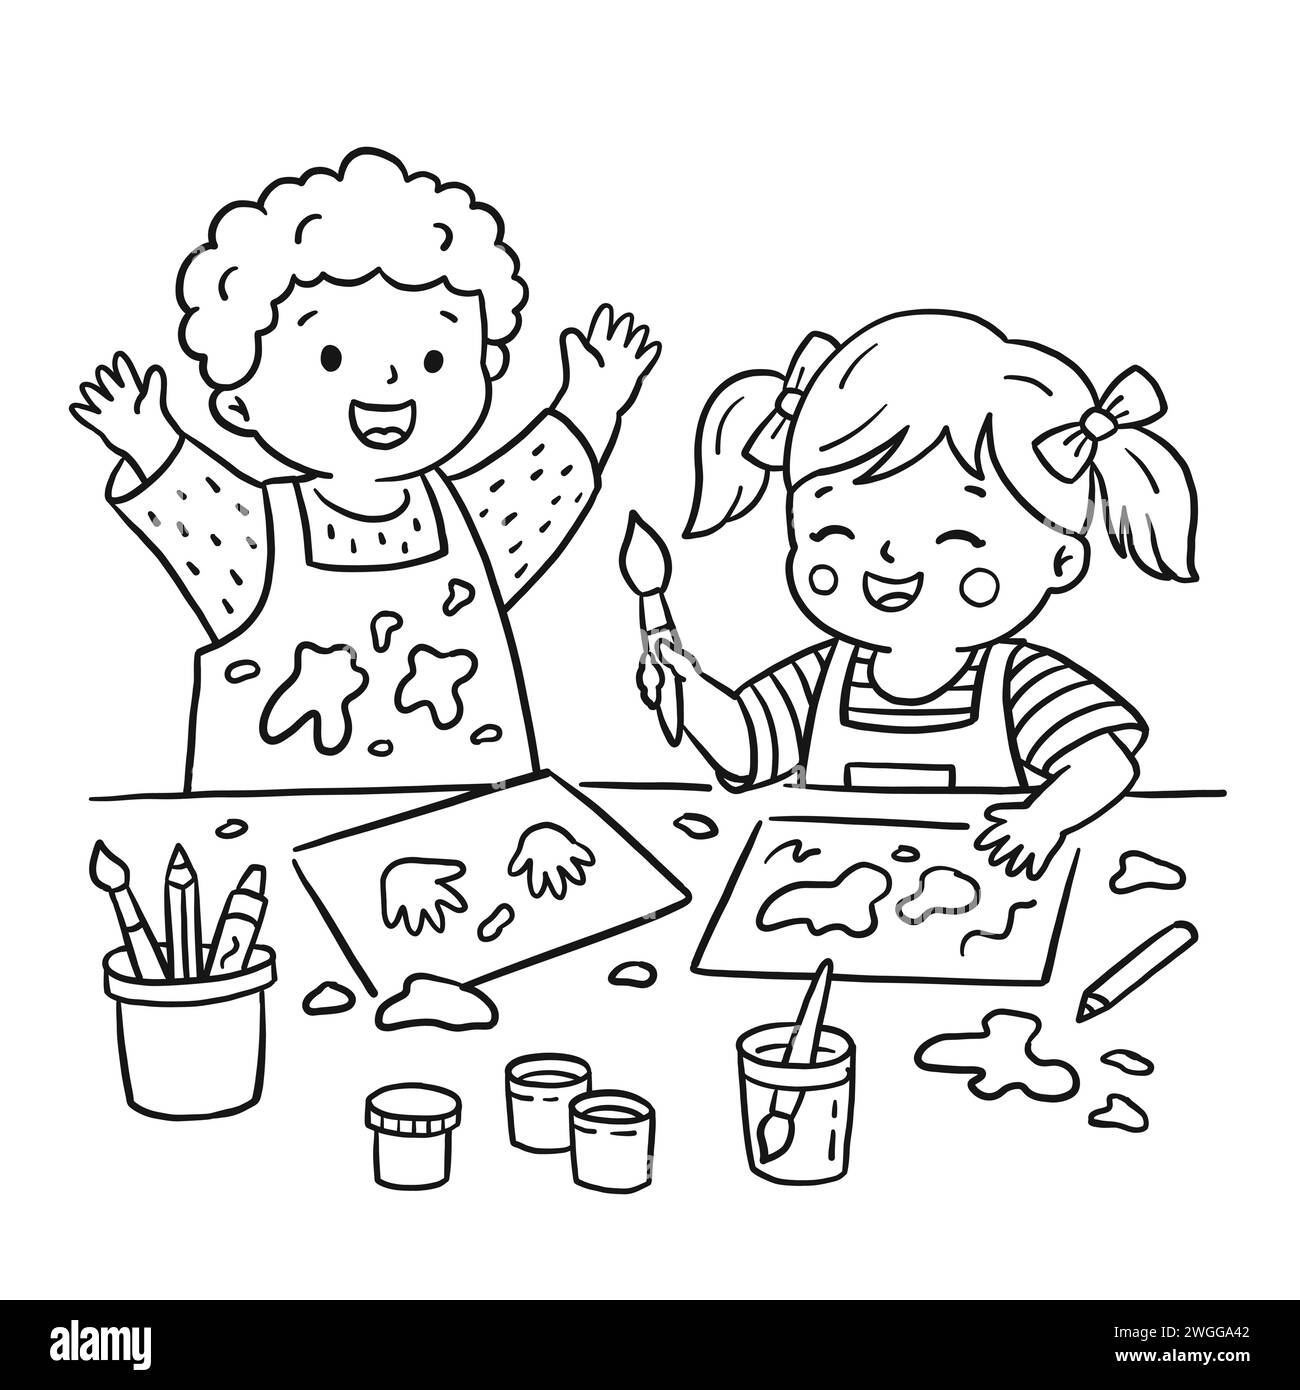 Kids drawing at kindergarten illustration in cartoon doodle style. Cute smiling toddlers boy and girl doing mess with paints. Black coloring book page Stock Vector